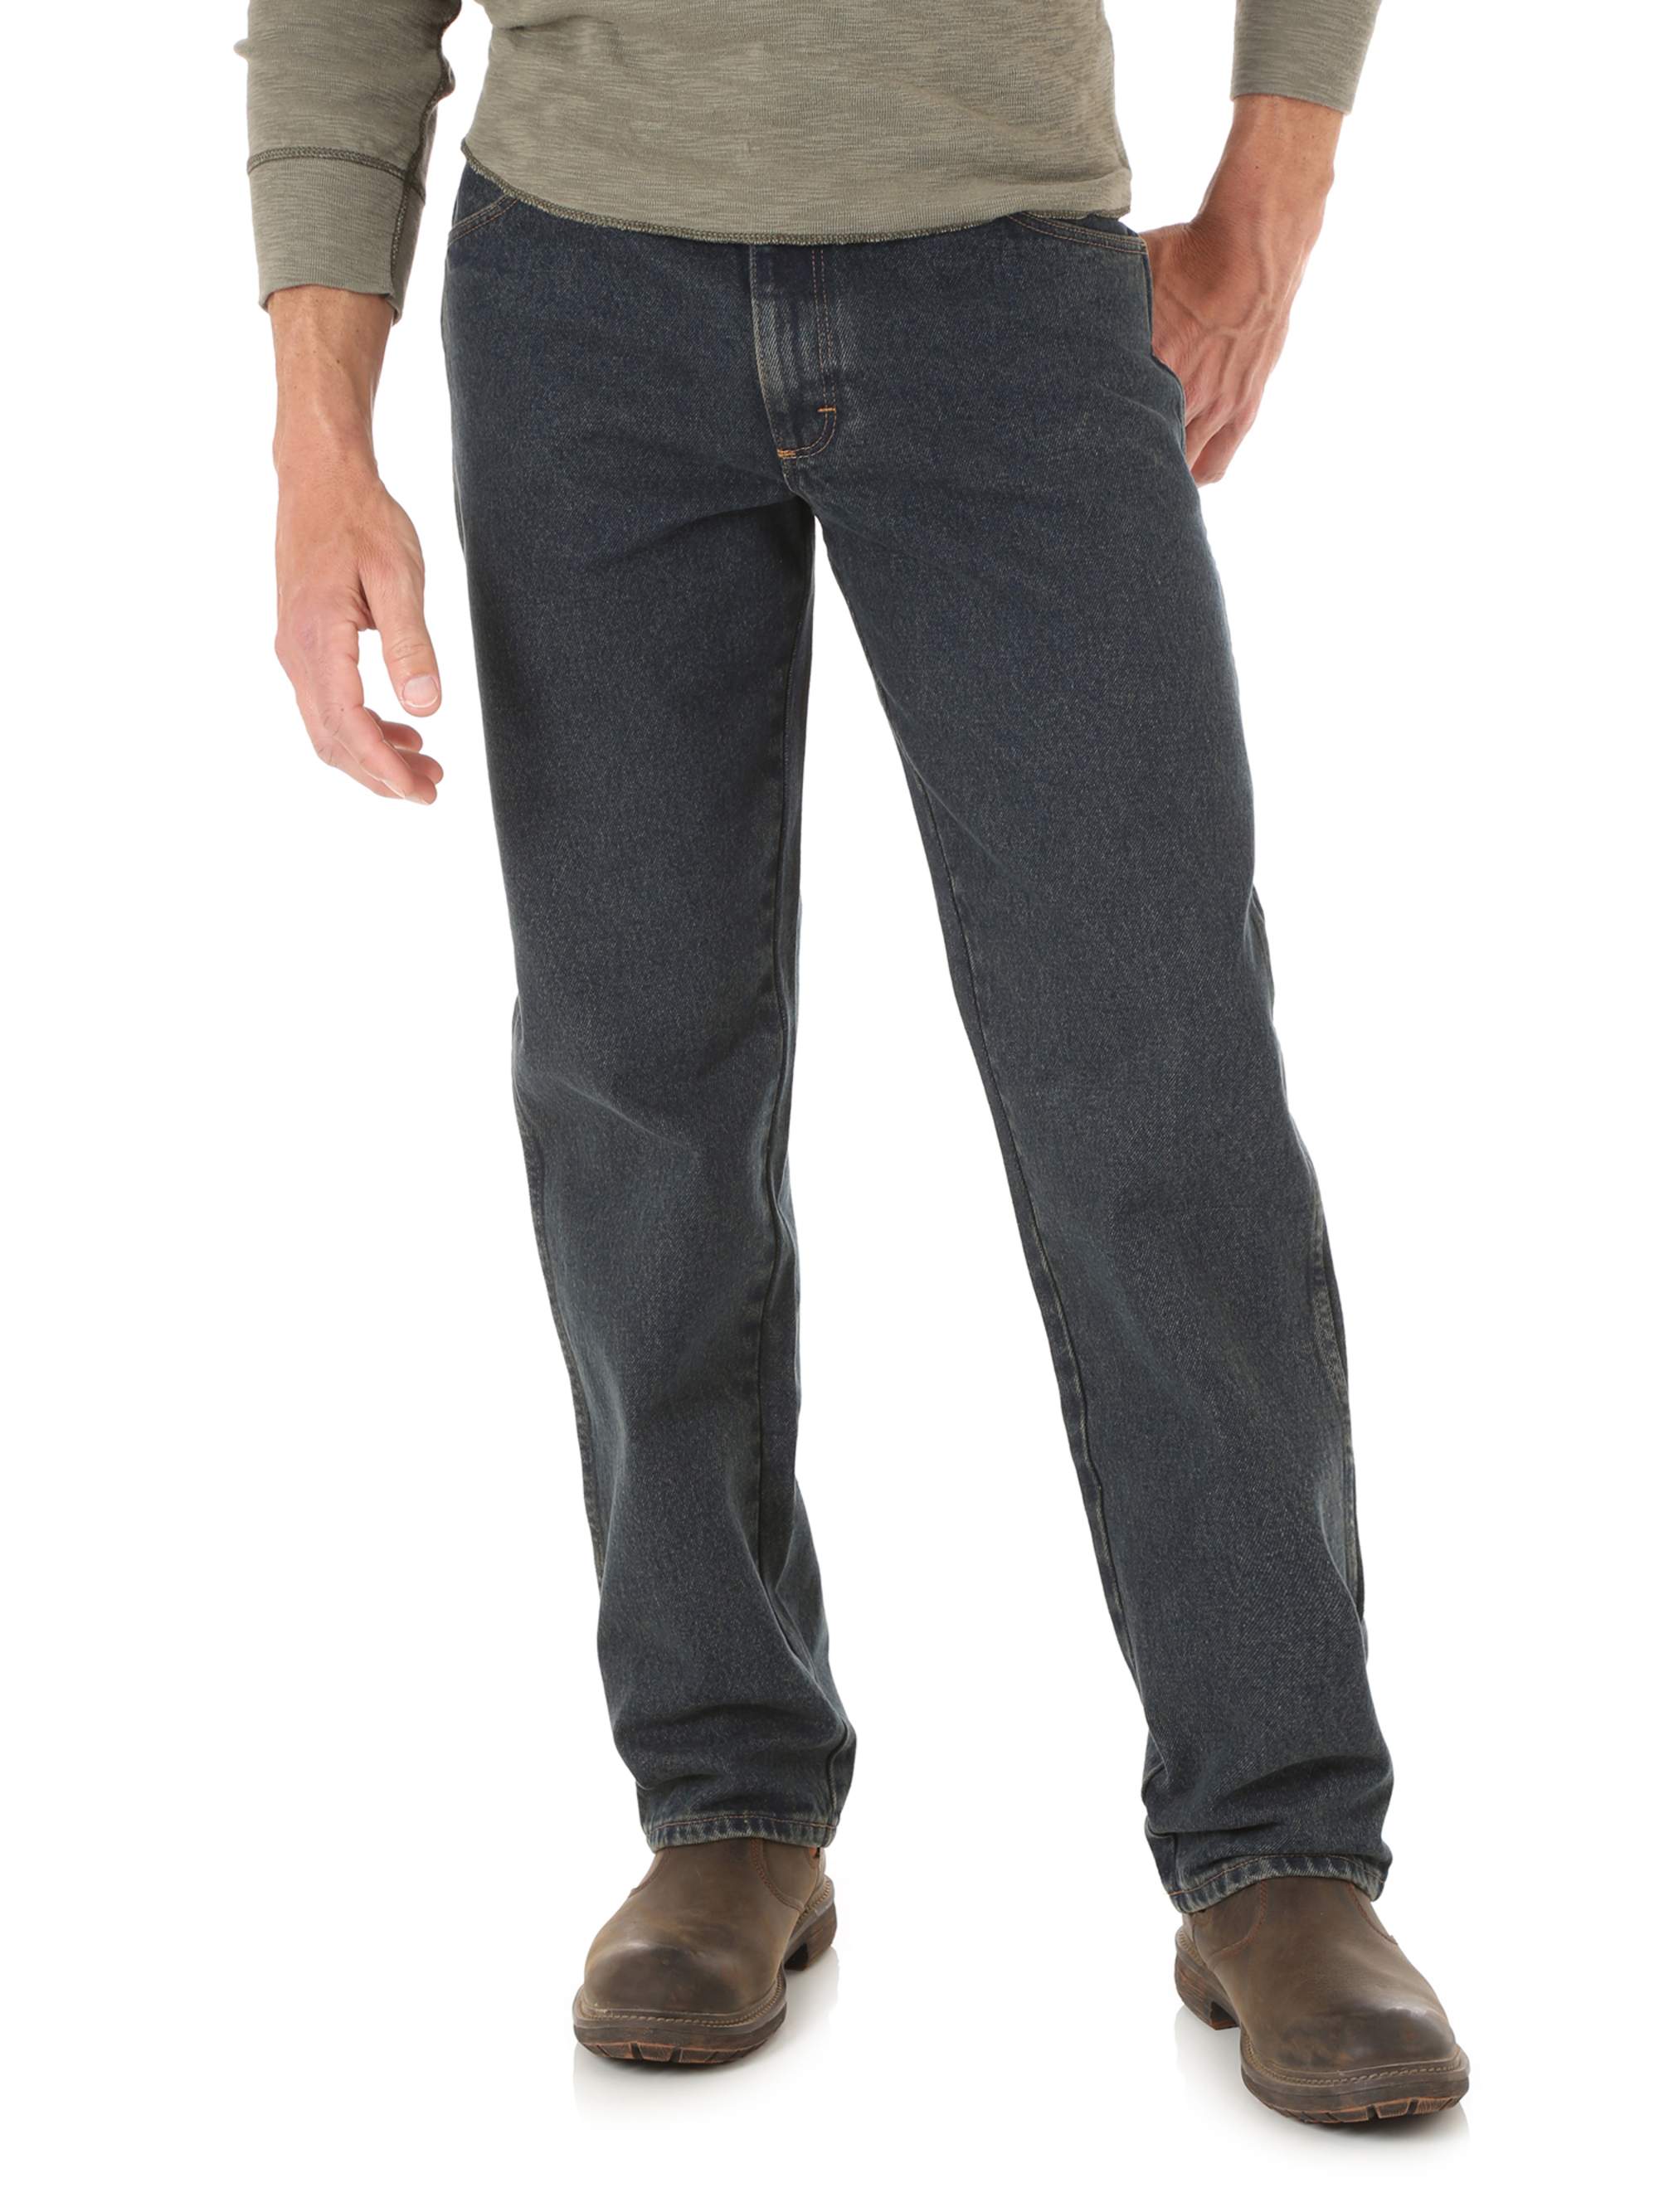 Wrangler Rustler Men's and Big Men's Relaxed Fit Jeans - image 1 of 4